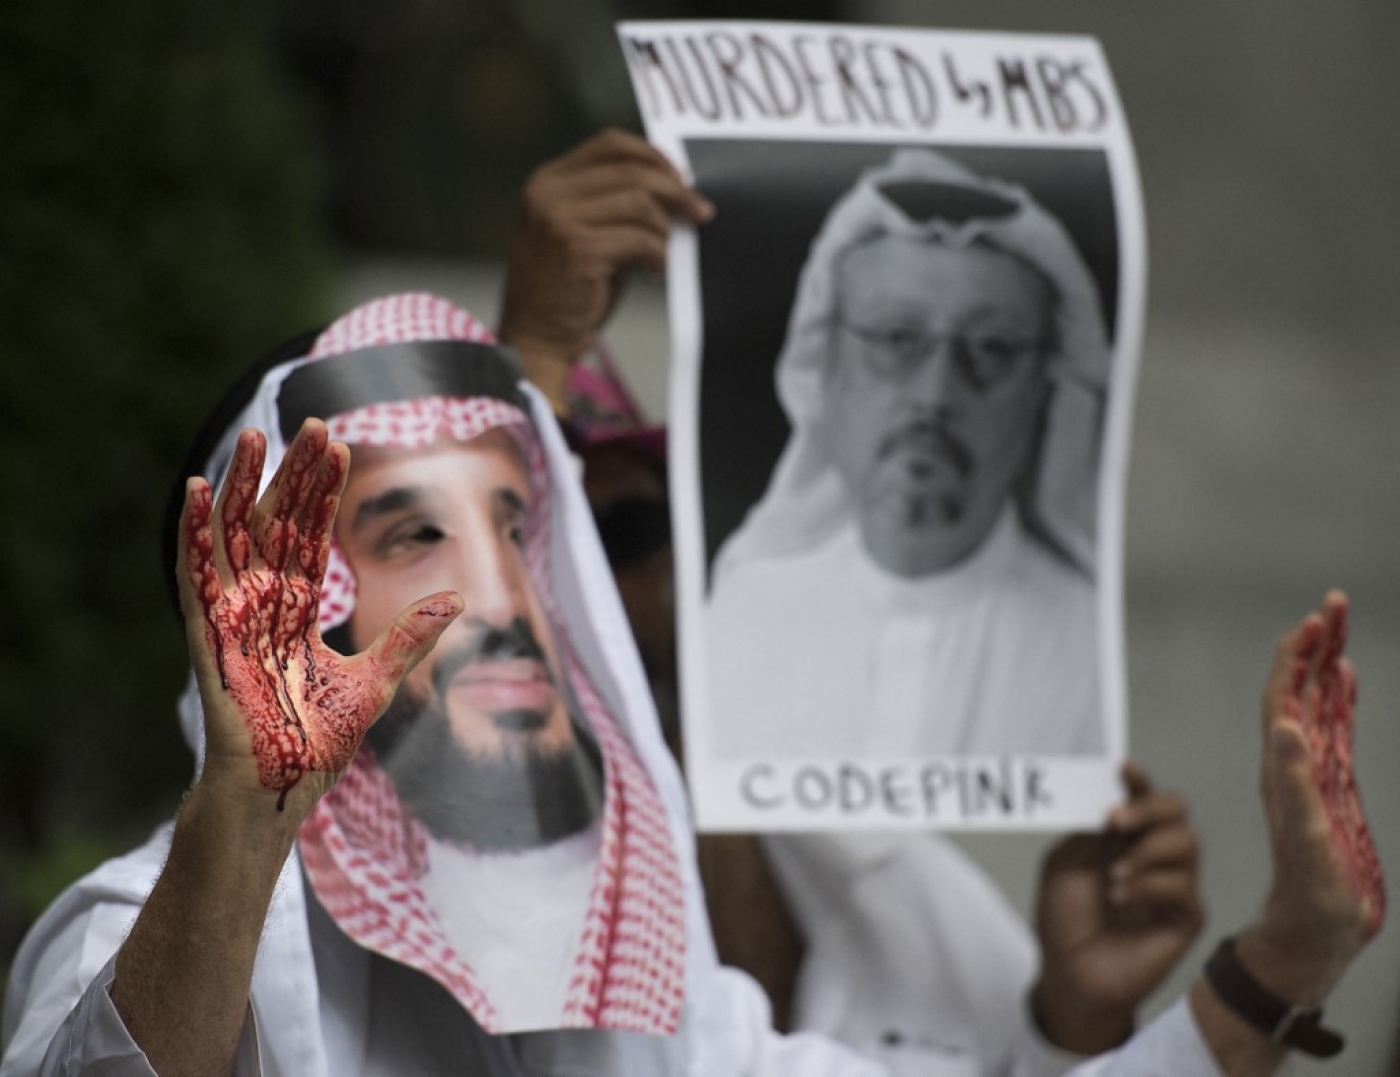 A demonstrator dressed as Crown Prince Mohammed bin Salman with blood on his hands protests outside the Saudi embassy in Washington, DC on 10 October 2018.